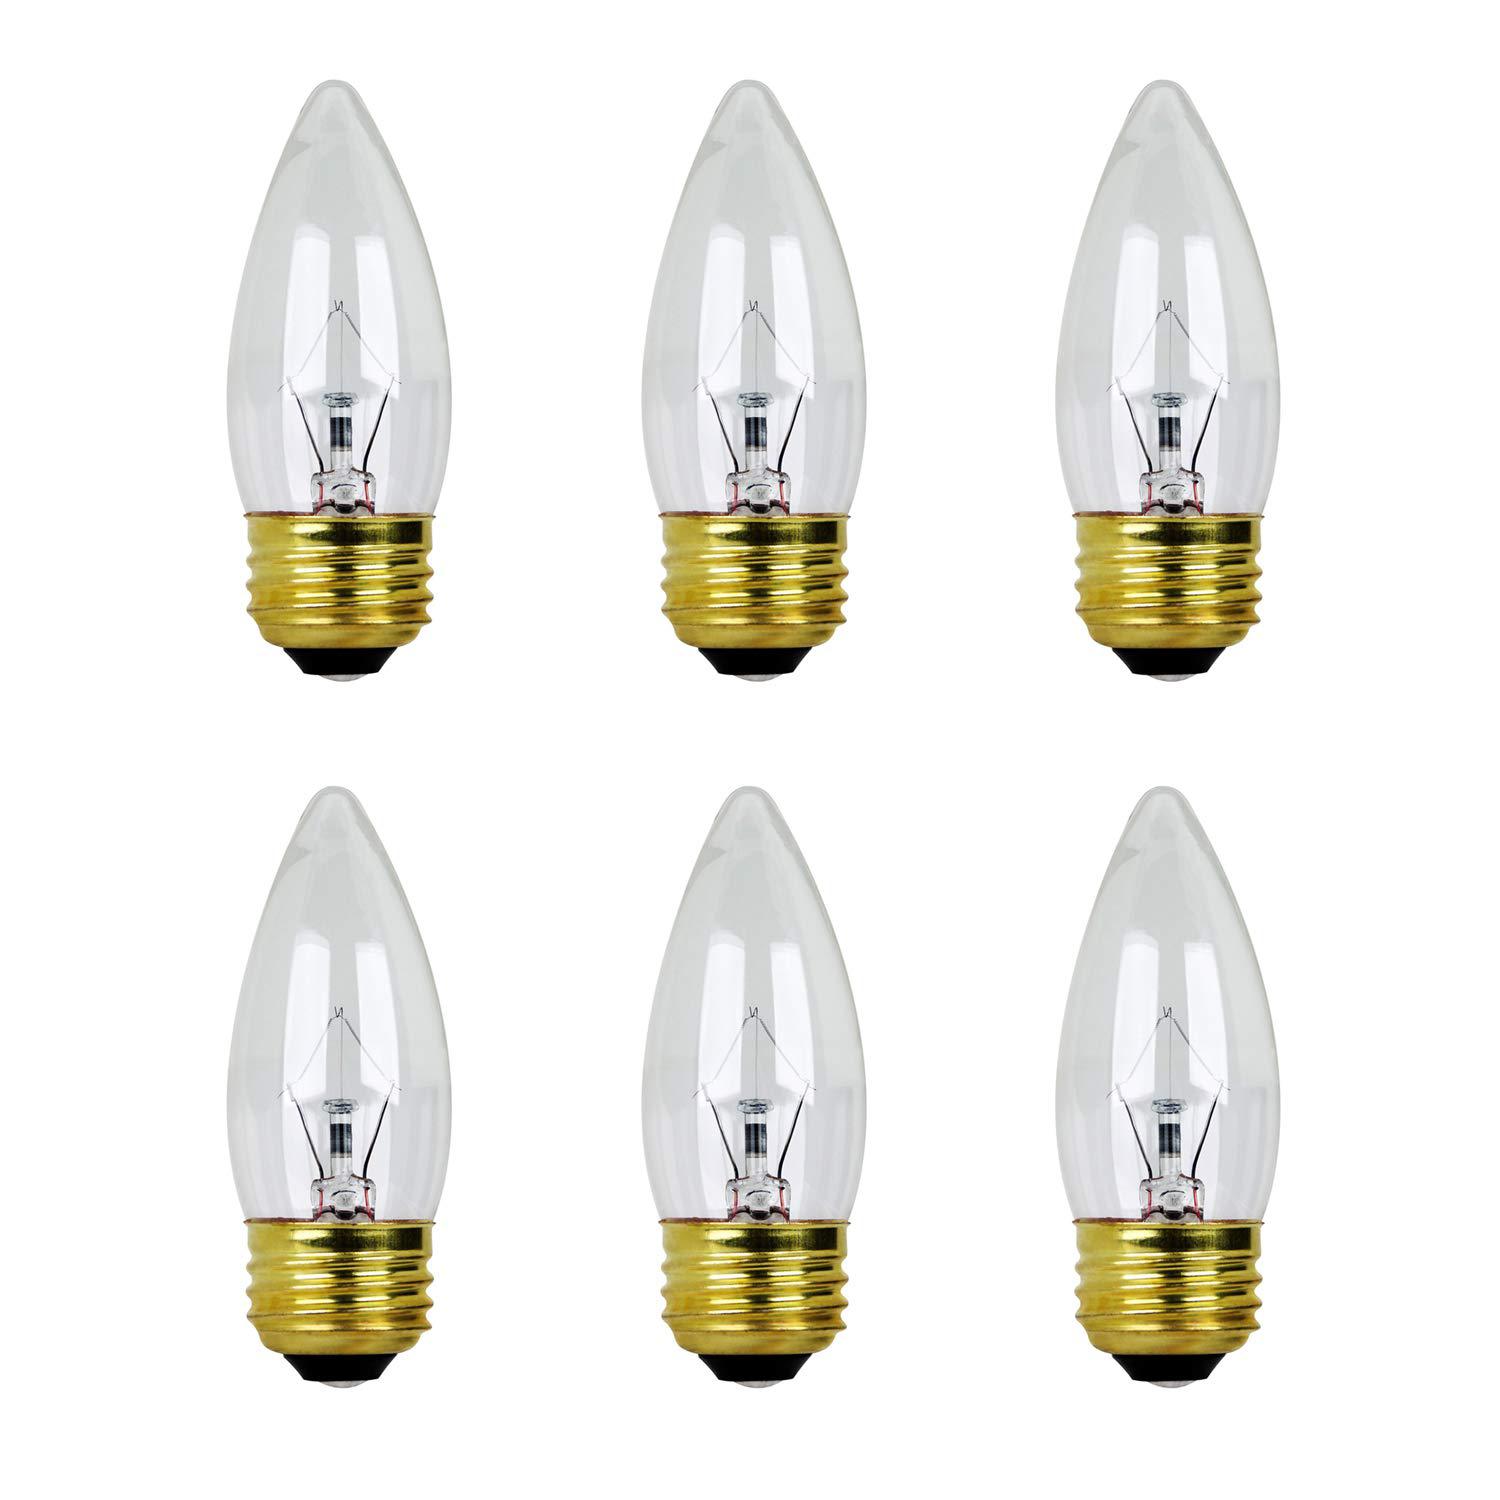 xtricity 40w b11 incandescent clear chandelier light bulb, torpedo tip, e26 medium base, 360 lumens, dimmable, 120v, (6 pack)